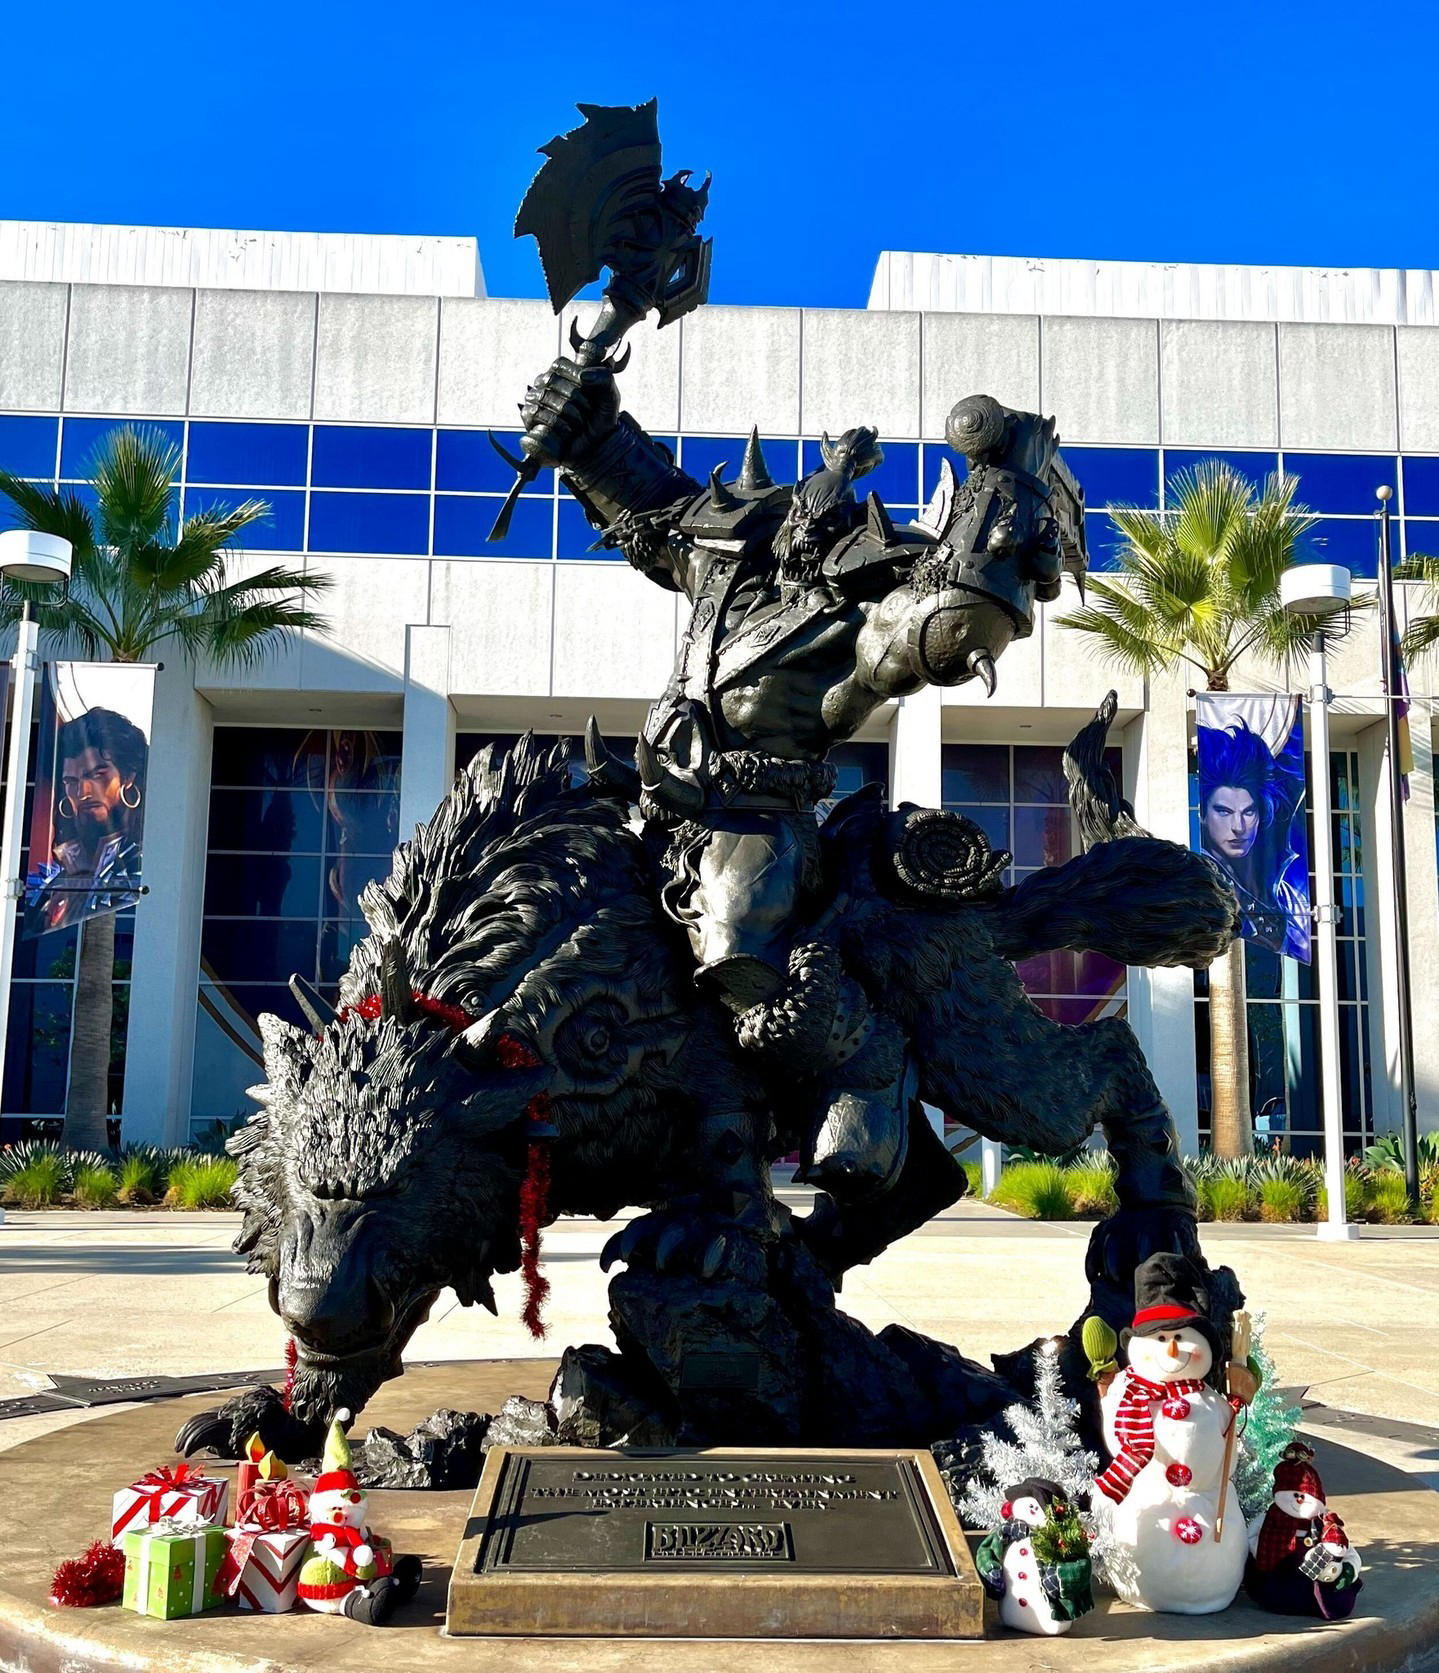 Blizzard Entertainment - We wish you all Happy Holidays with your friends and family